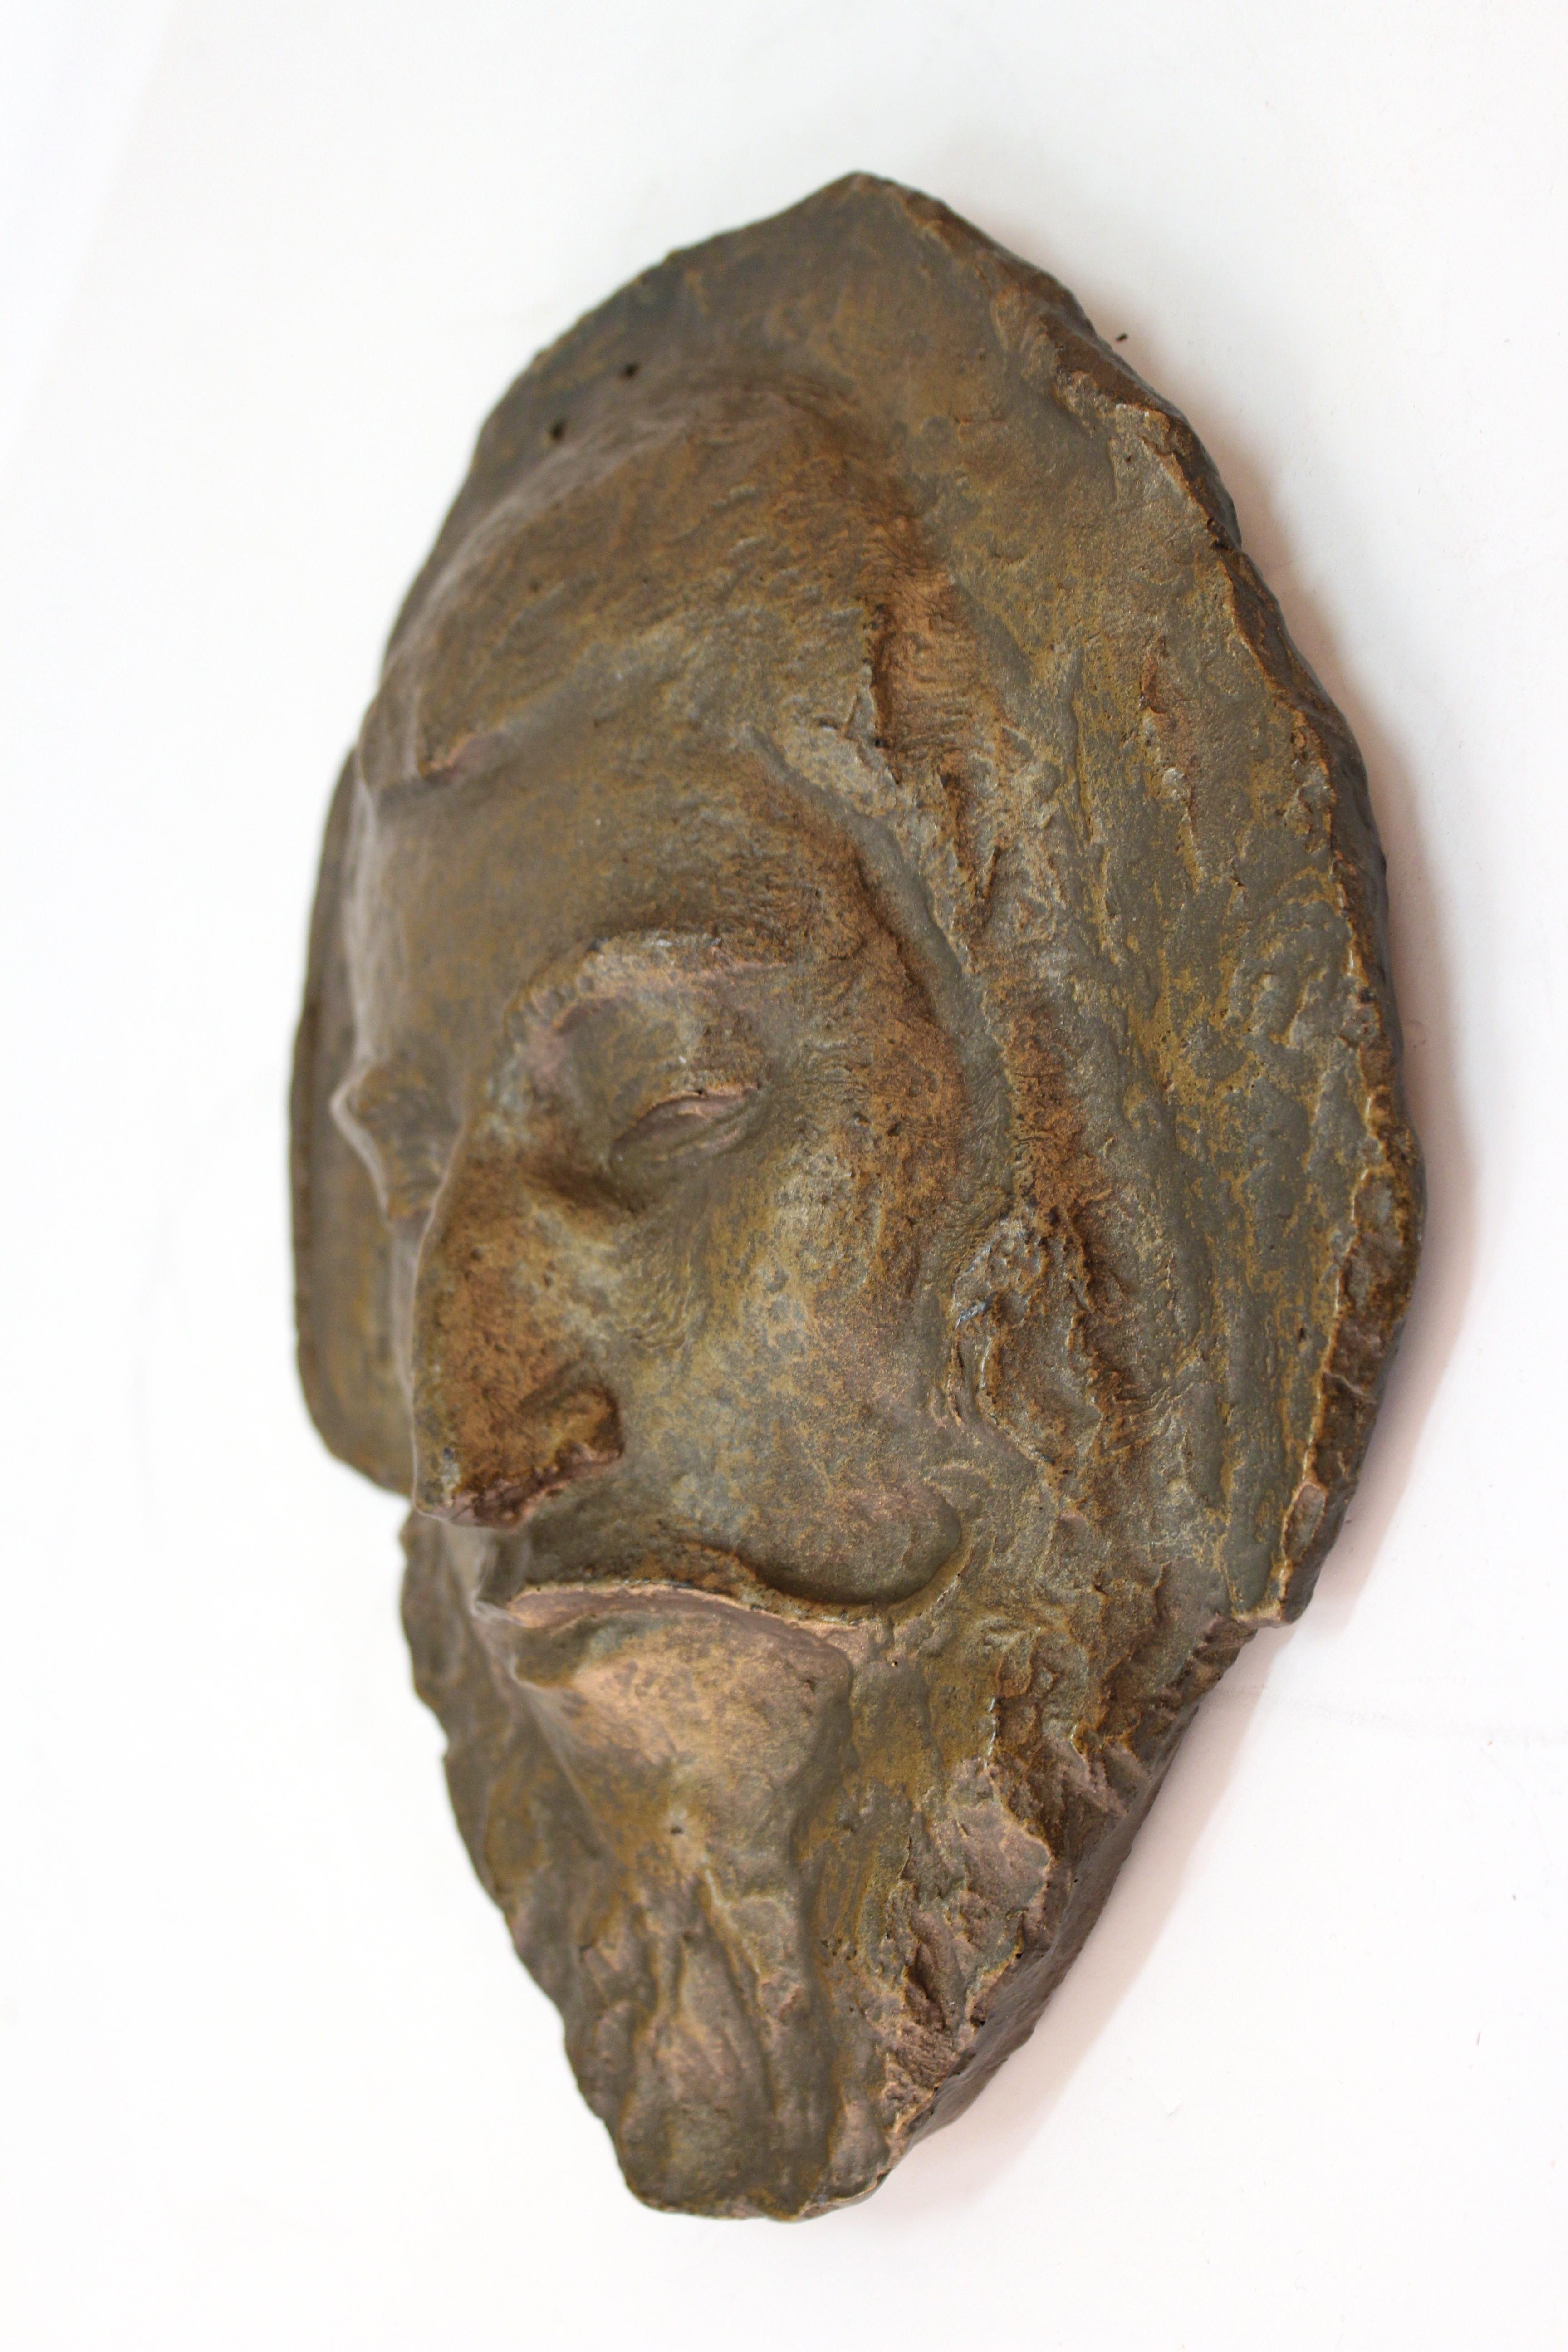 Neoclassical Classical Style Bronzed Plaster Face of Paul Gauguin